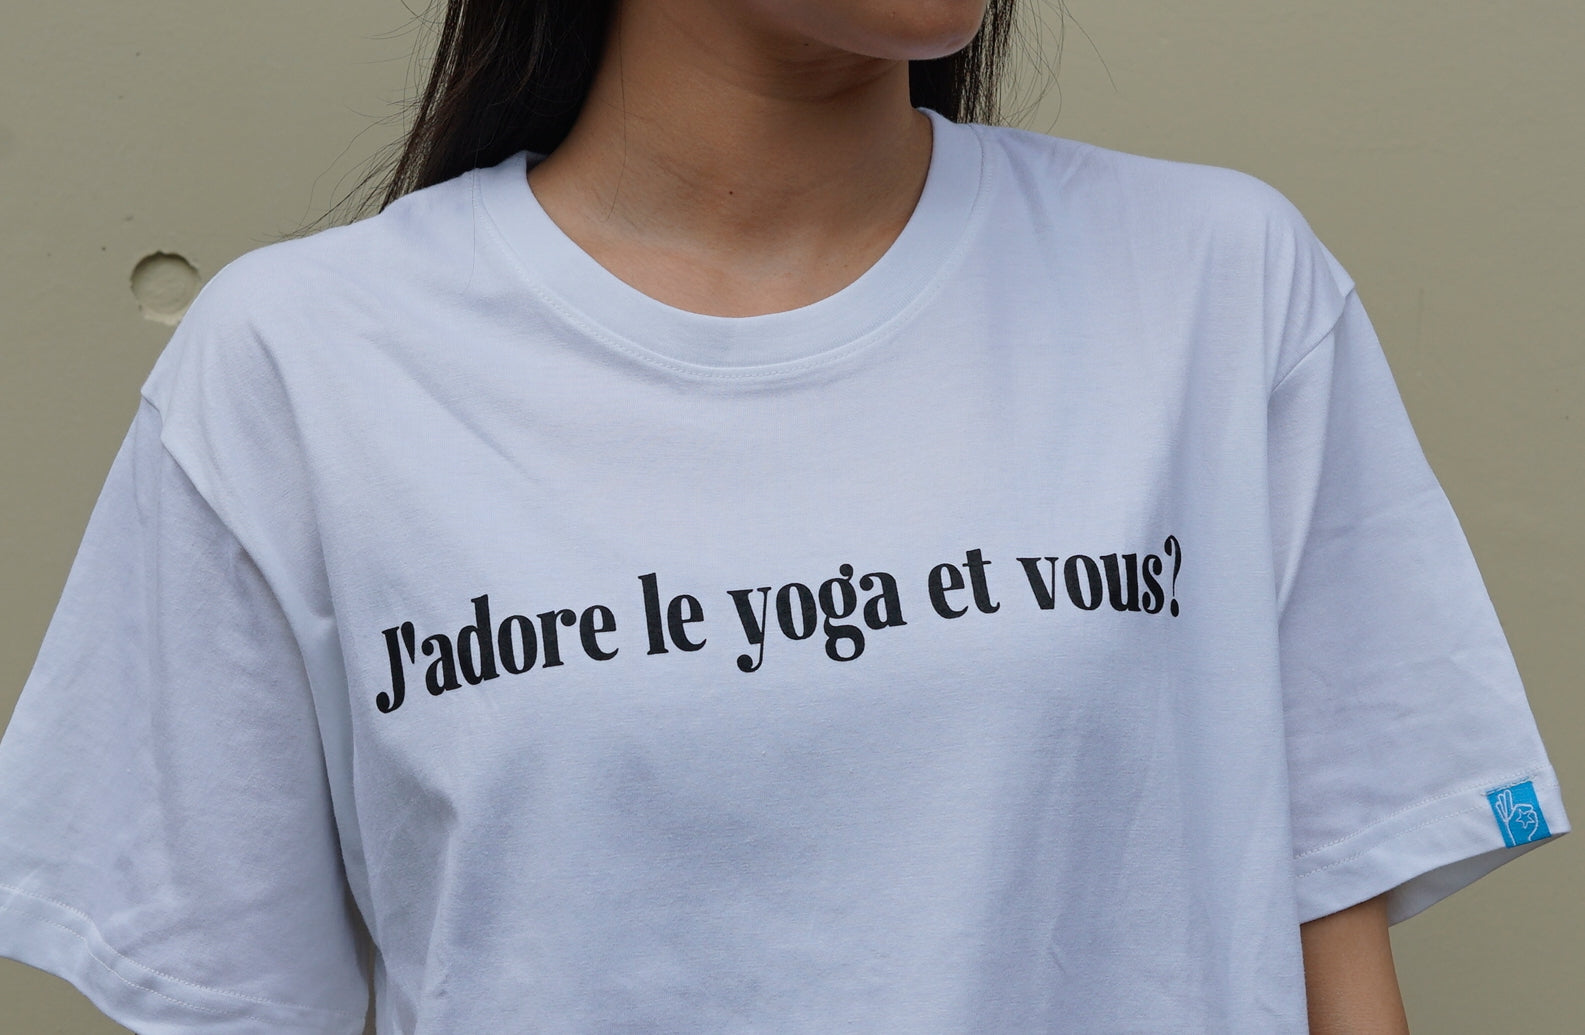 i love yoga, how about you?